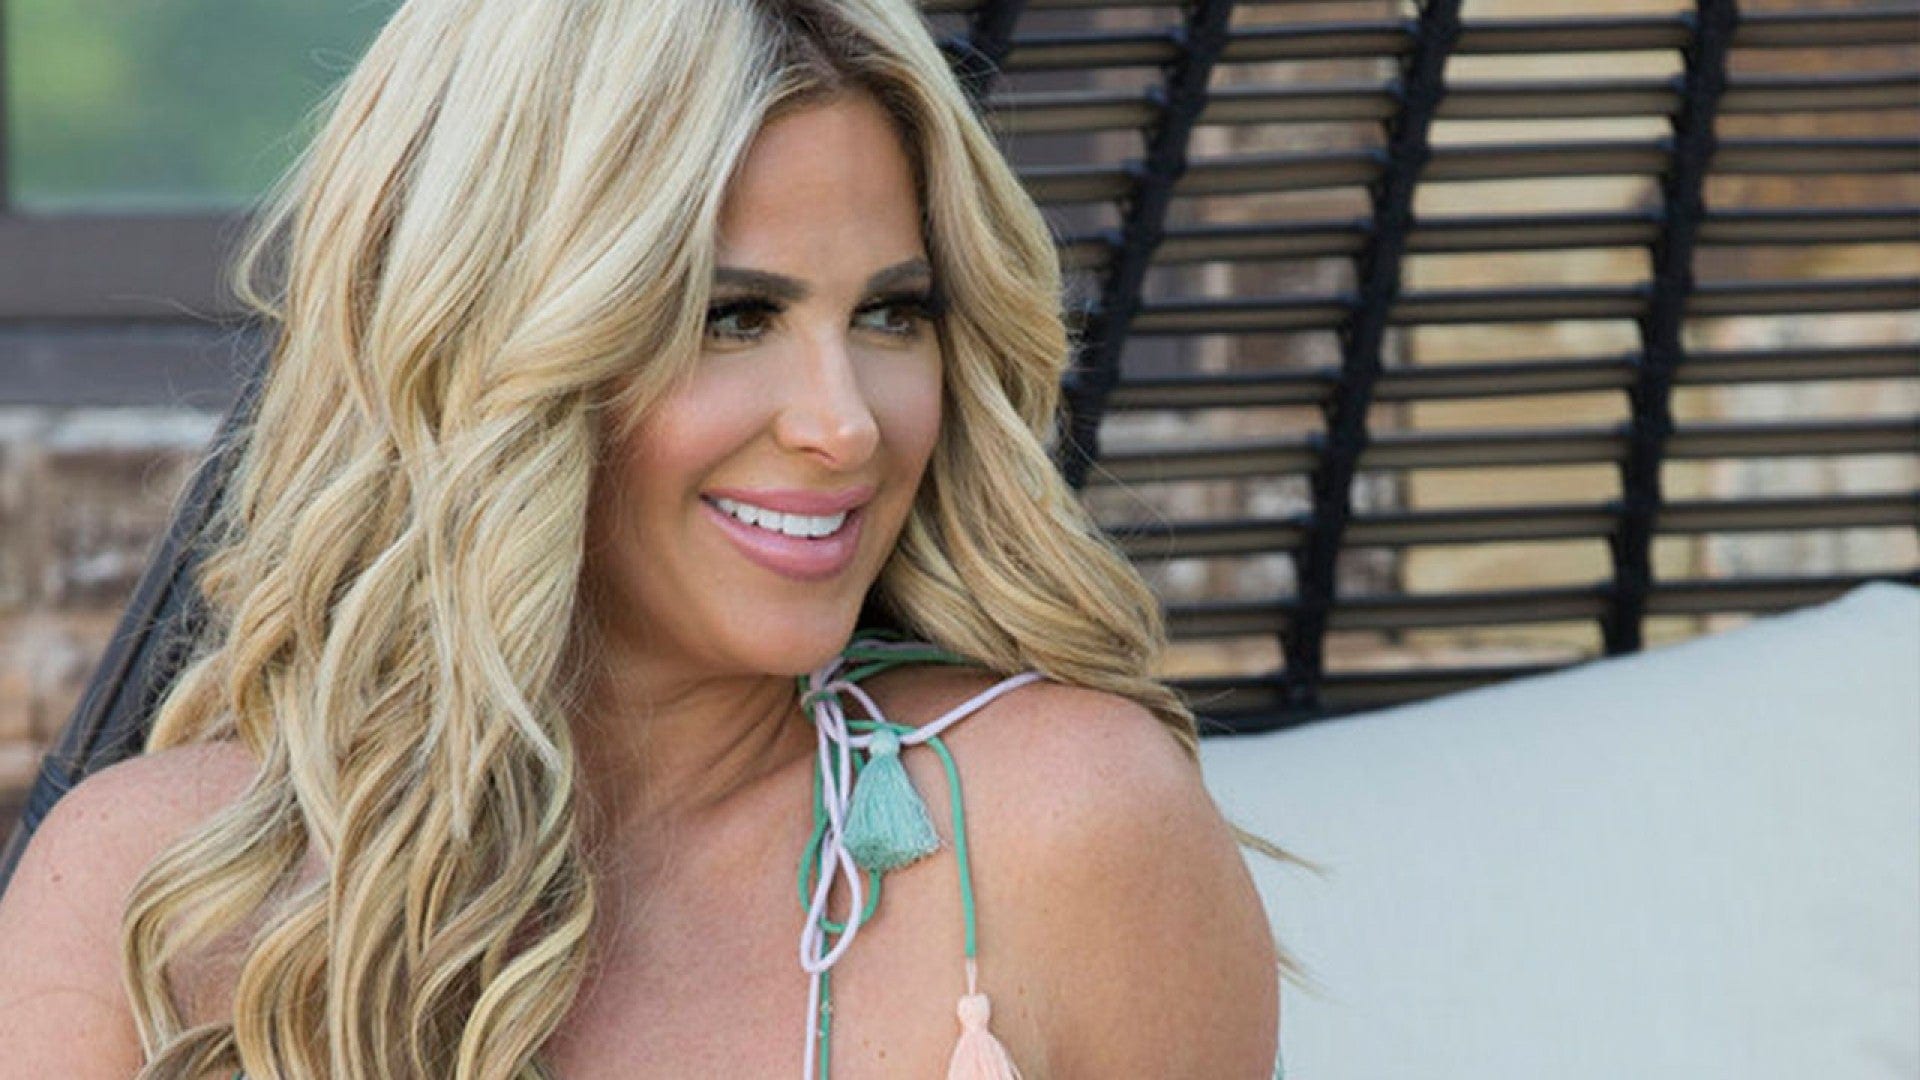 Kim Zolciak Net Worth: How Much Does The Real Housewives of Atlanta Star Earn?